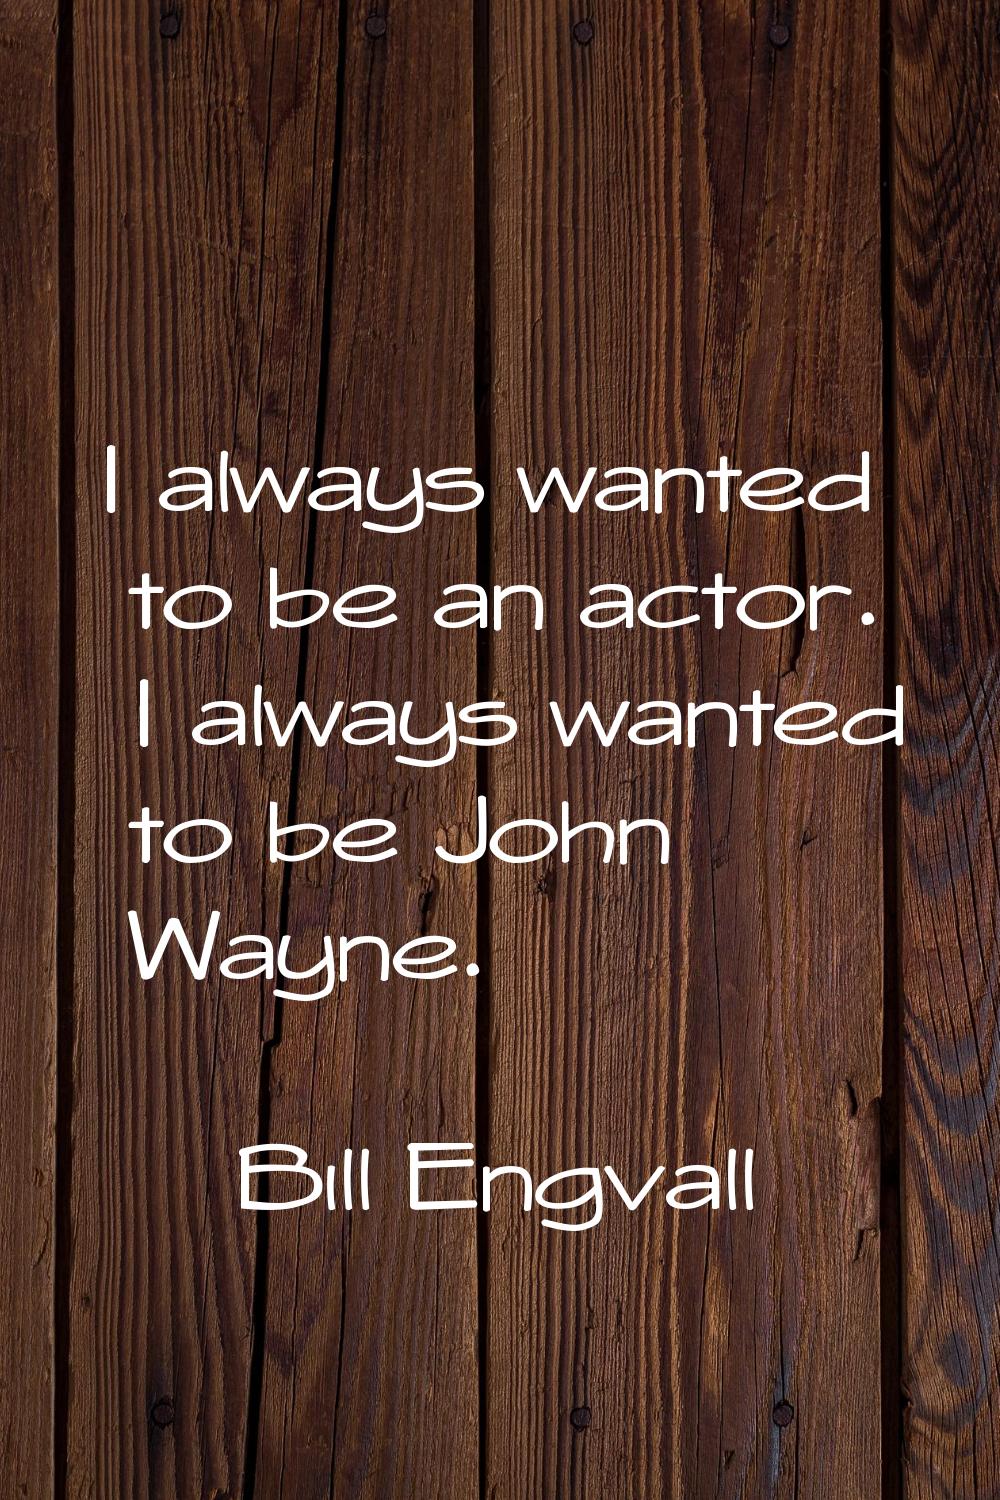 I always wanted to be an actor. I always wanted to be John Wayne.